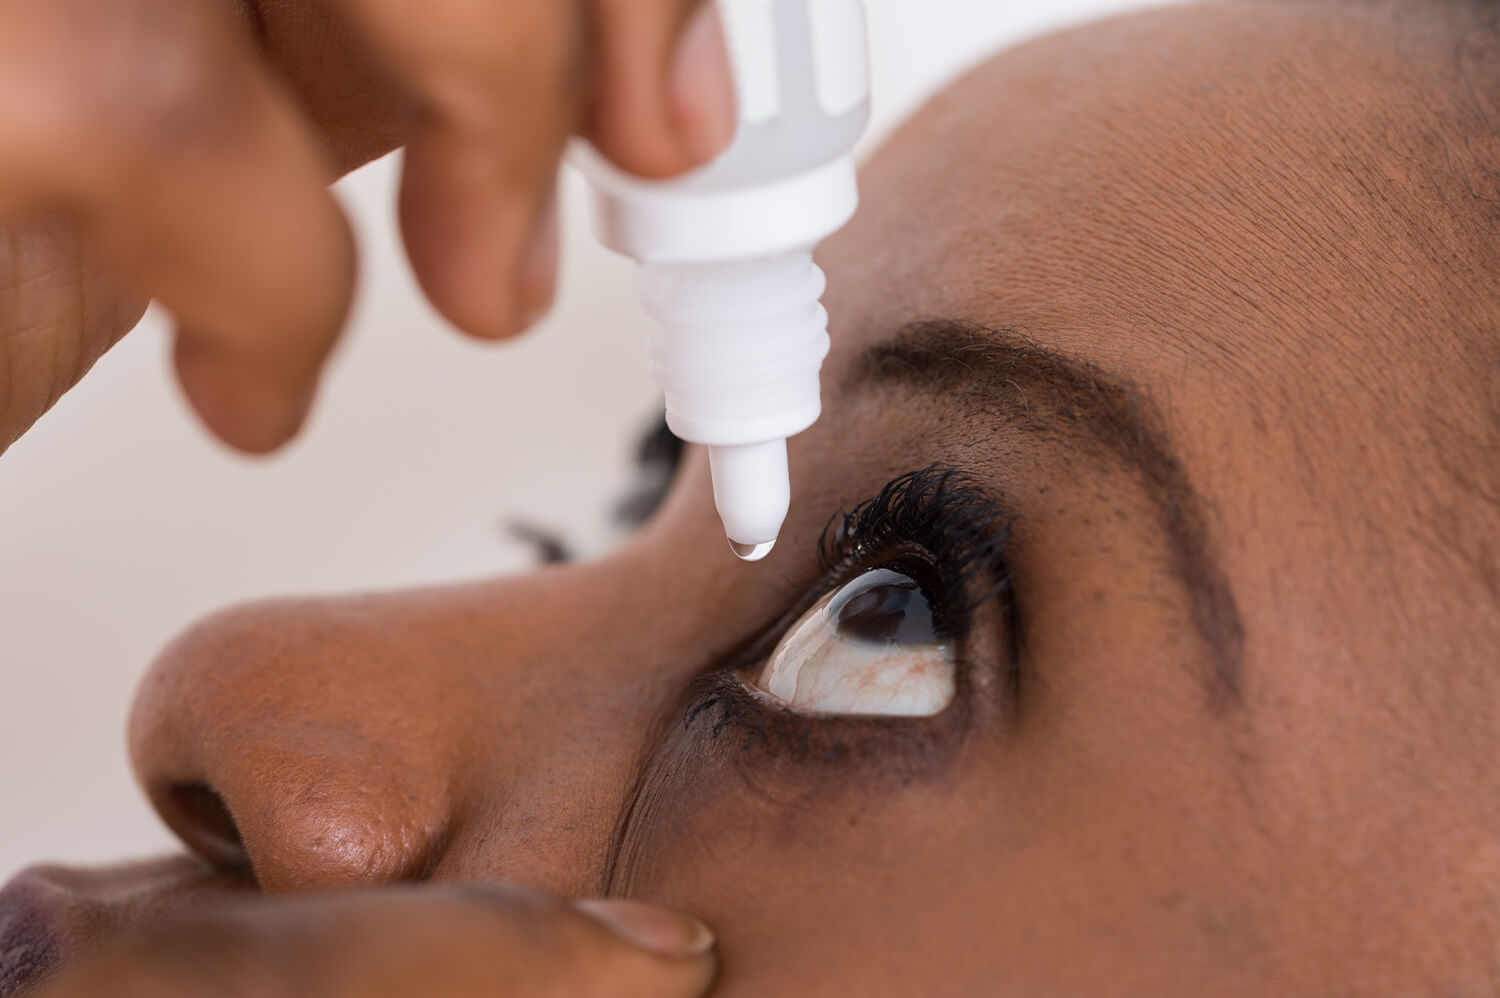 Glaucoma Evaluations and Treatments